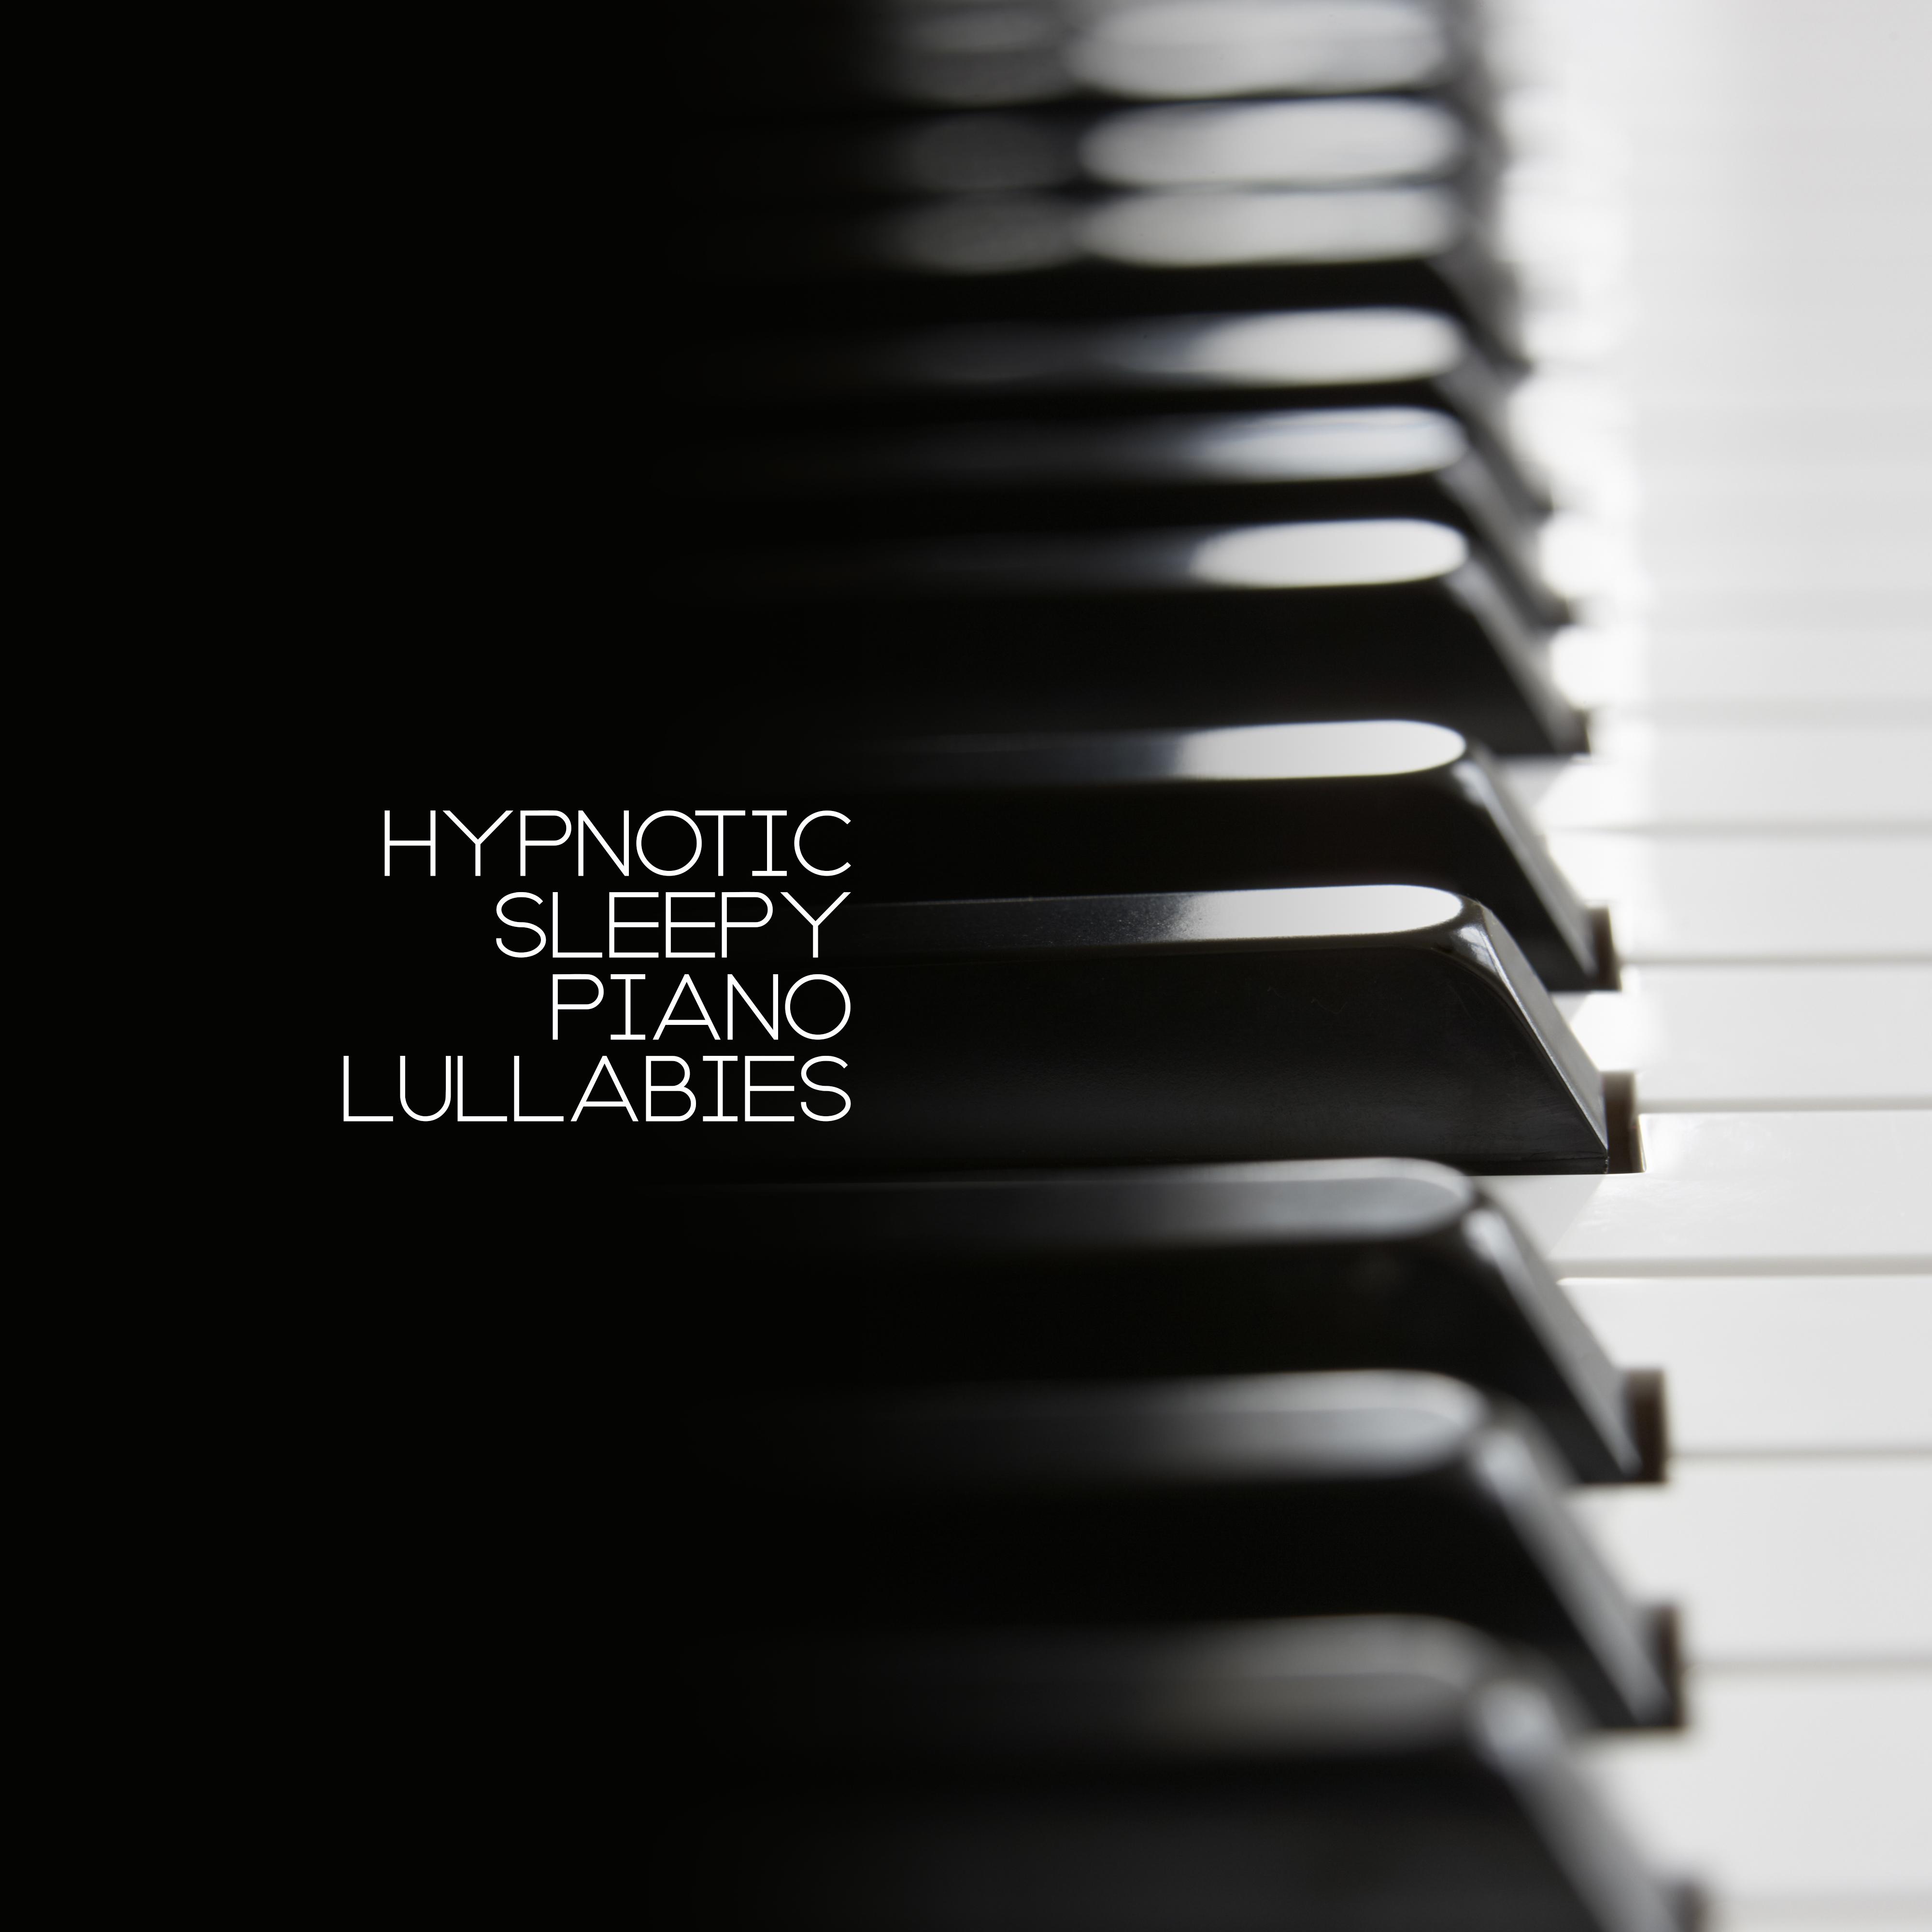 Hypnotic Sleepy Piano Lullabies: Soft & Soothing Piano Jazz 2019 Music for Best Sleep Experience, Total Relaxation, Sweet Dreams, Calm Down & Rest